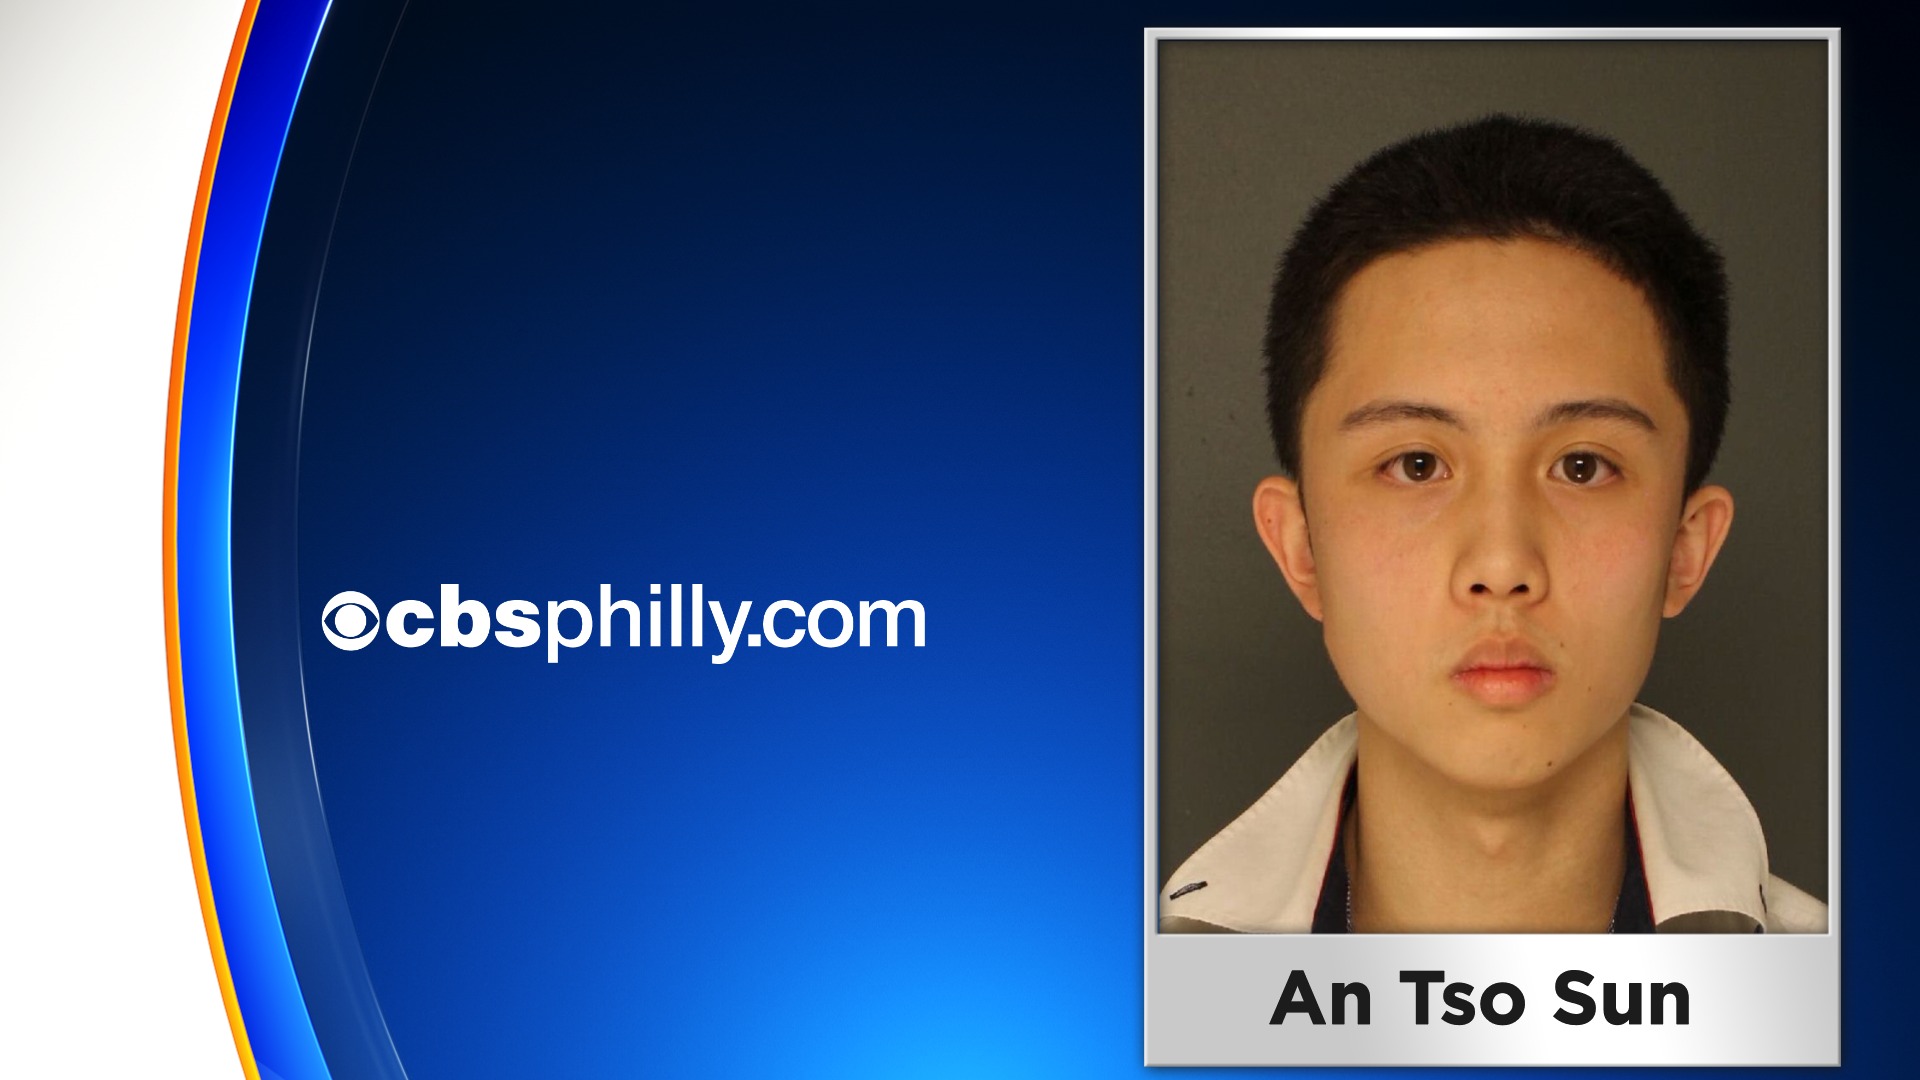 An Tso Sun Teen Arrested For Allegedly Threatening To ‘Shoot Up’ Upper Darby School